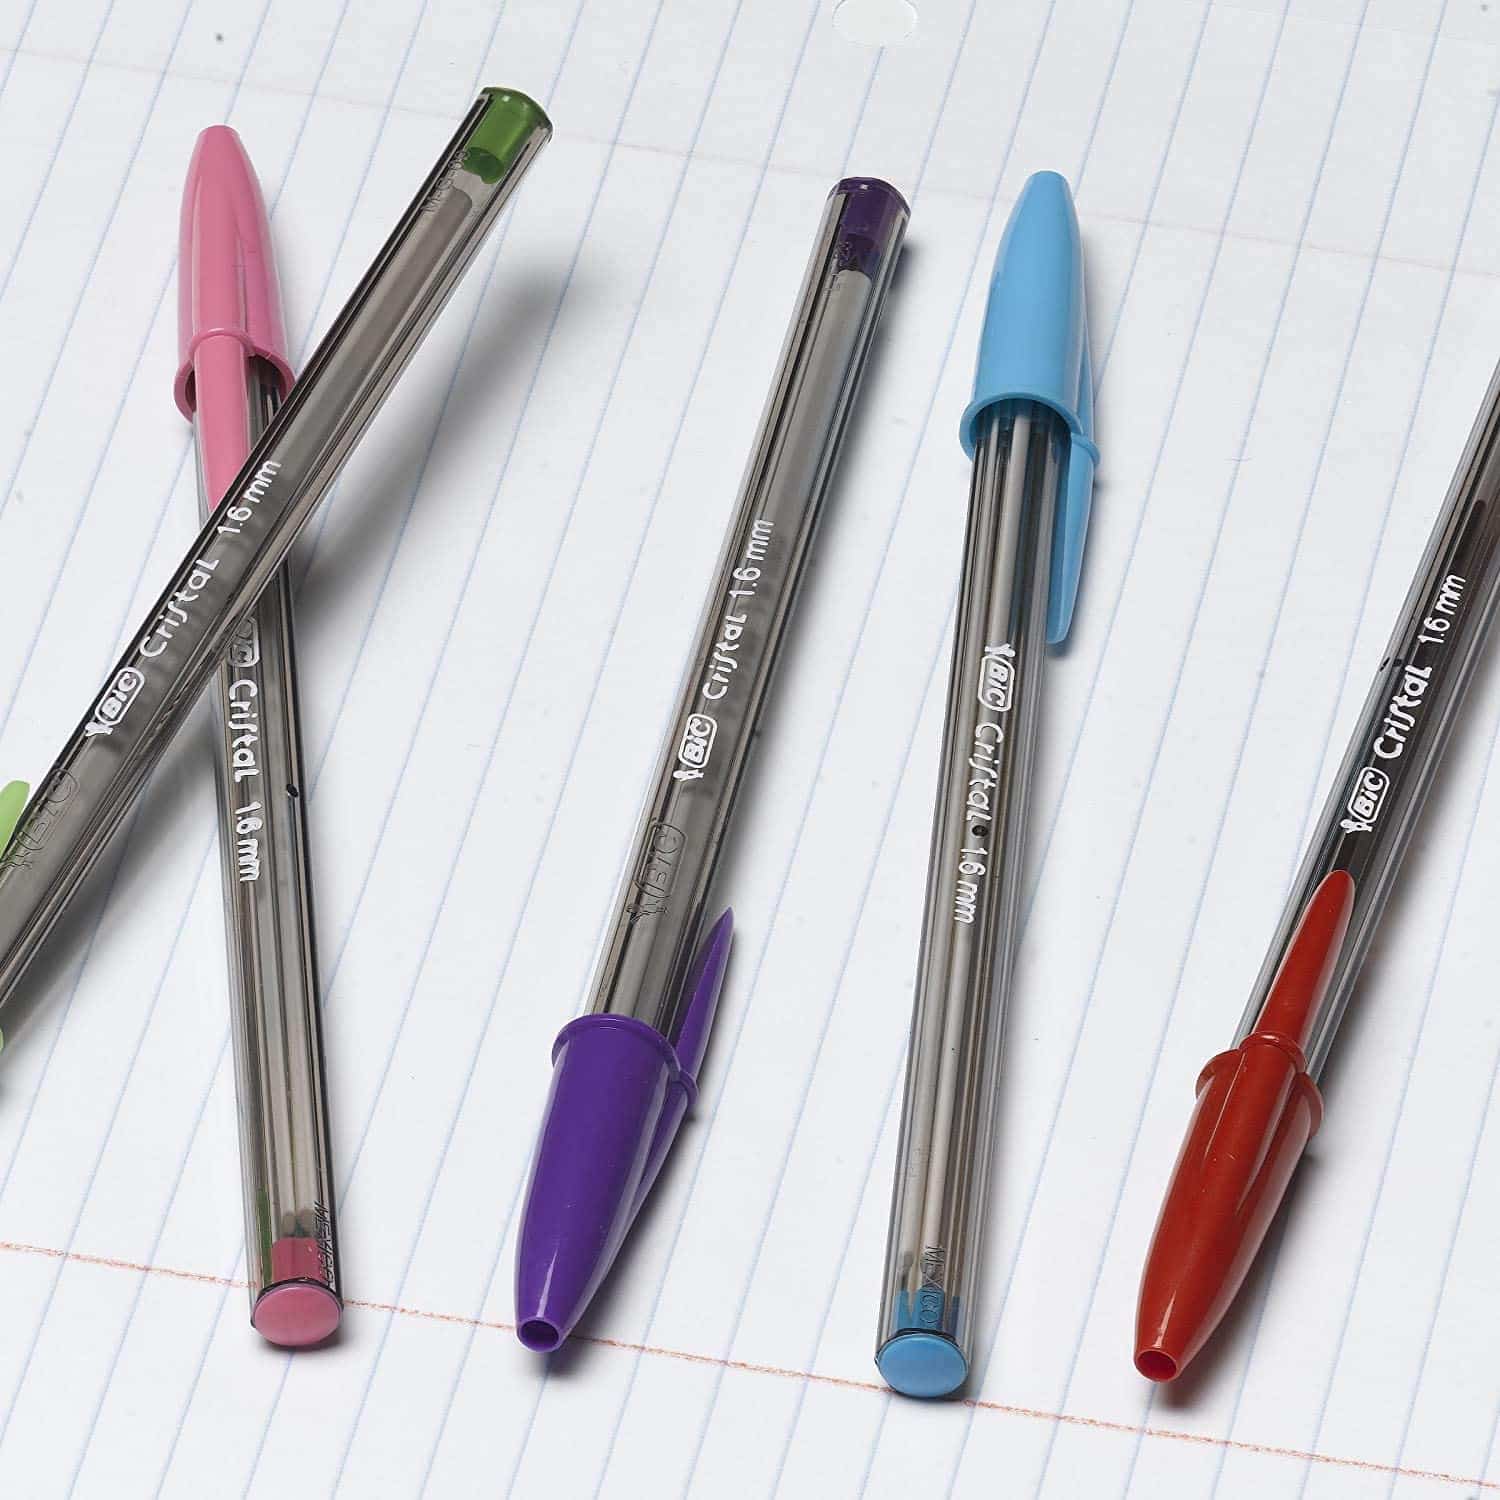 BIC Cristal Xtra Bold Fashion Ballpoint Pens in use